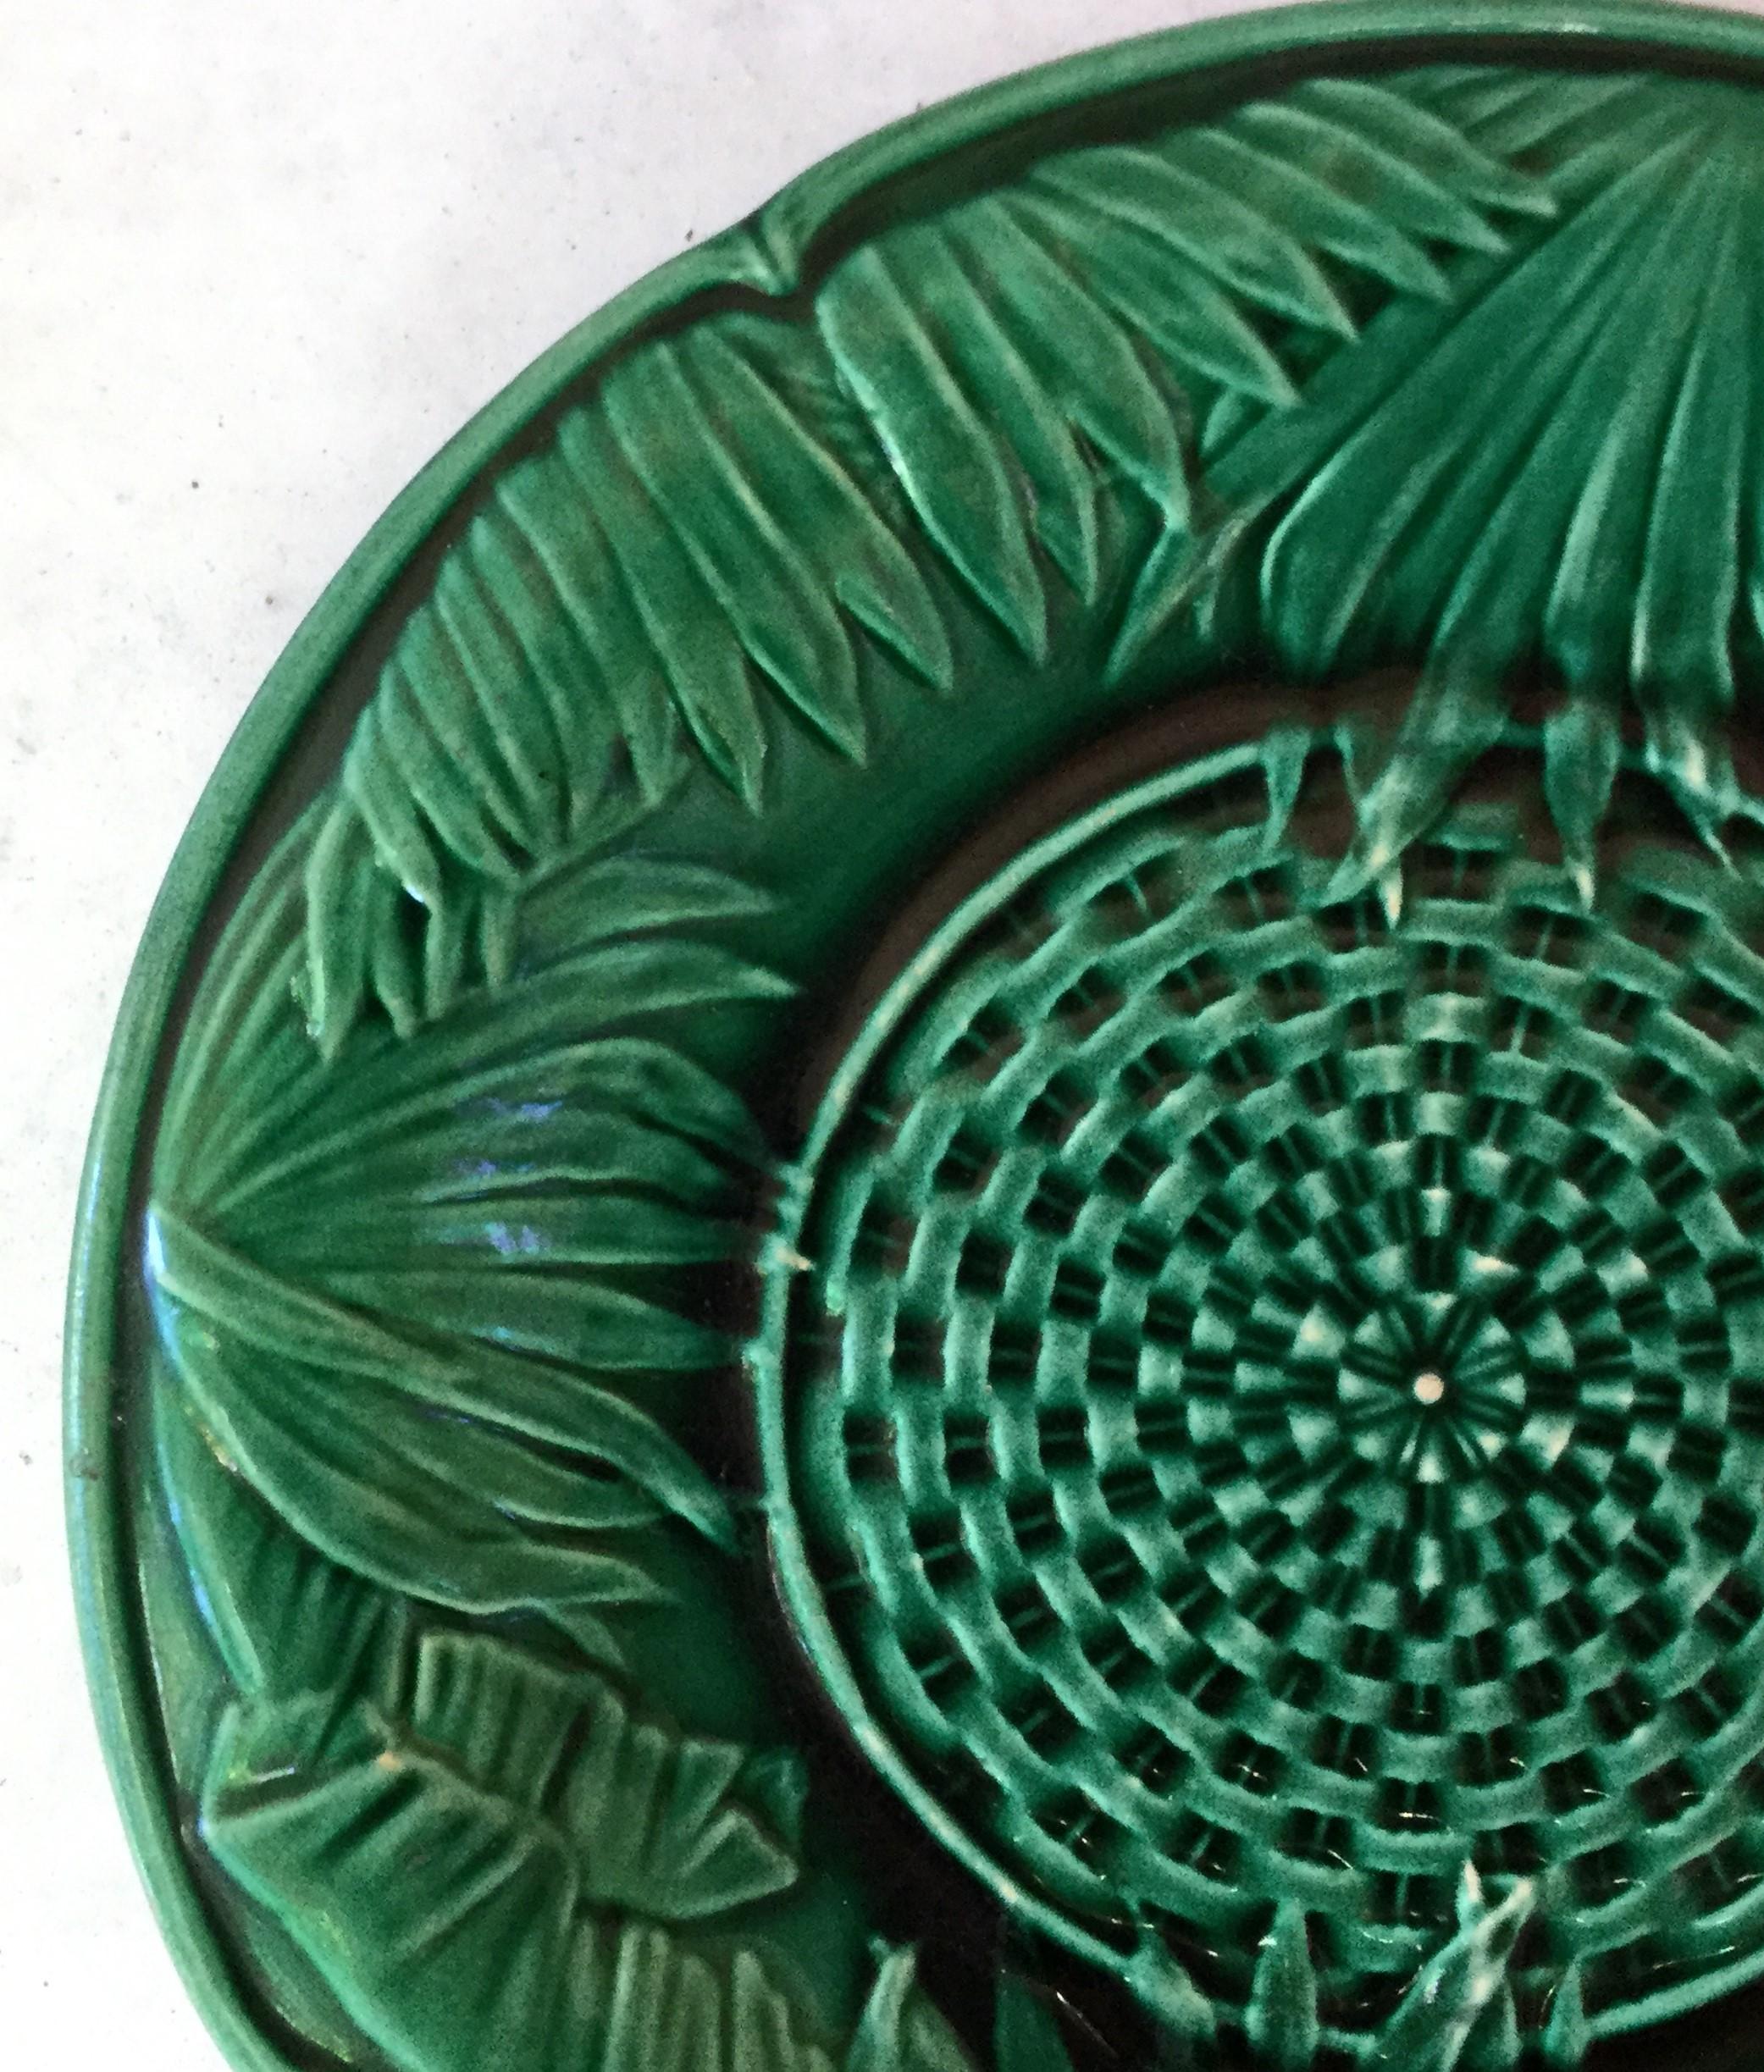 Victorian green Majolica palm leaves plate, circa 1880.
Basketweave on the center.